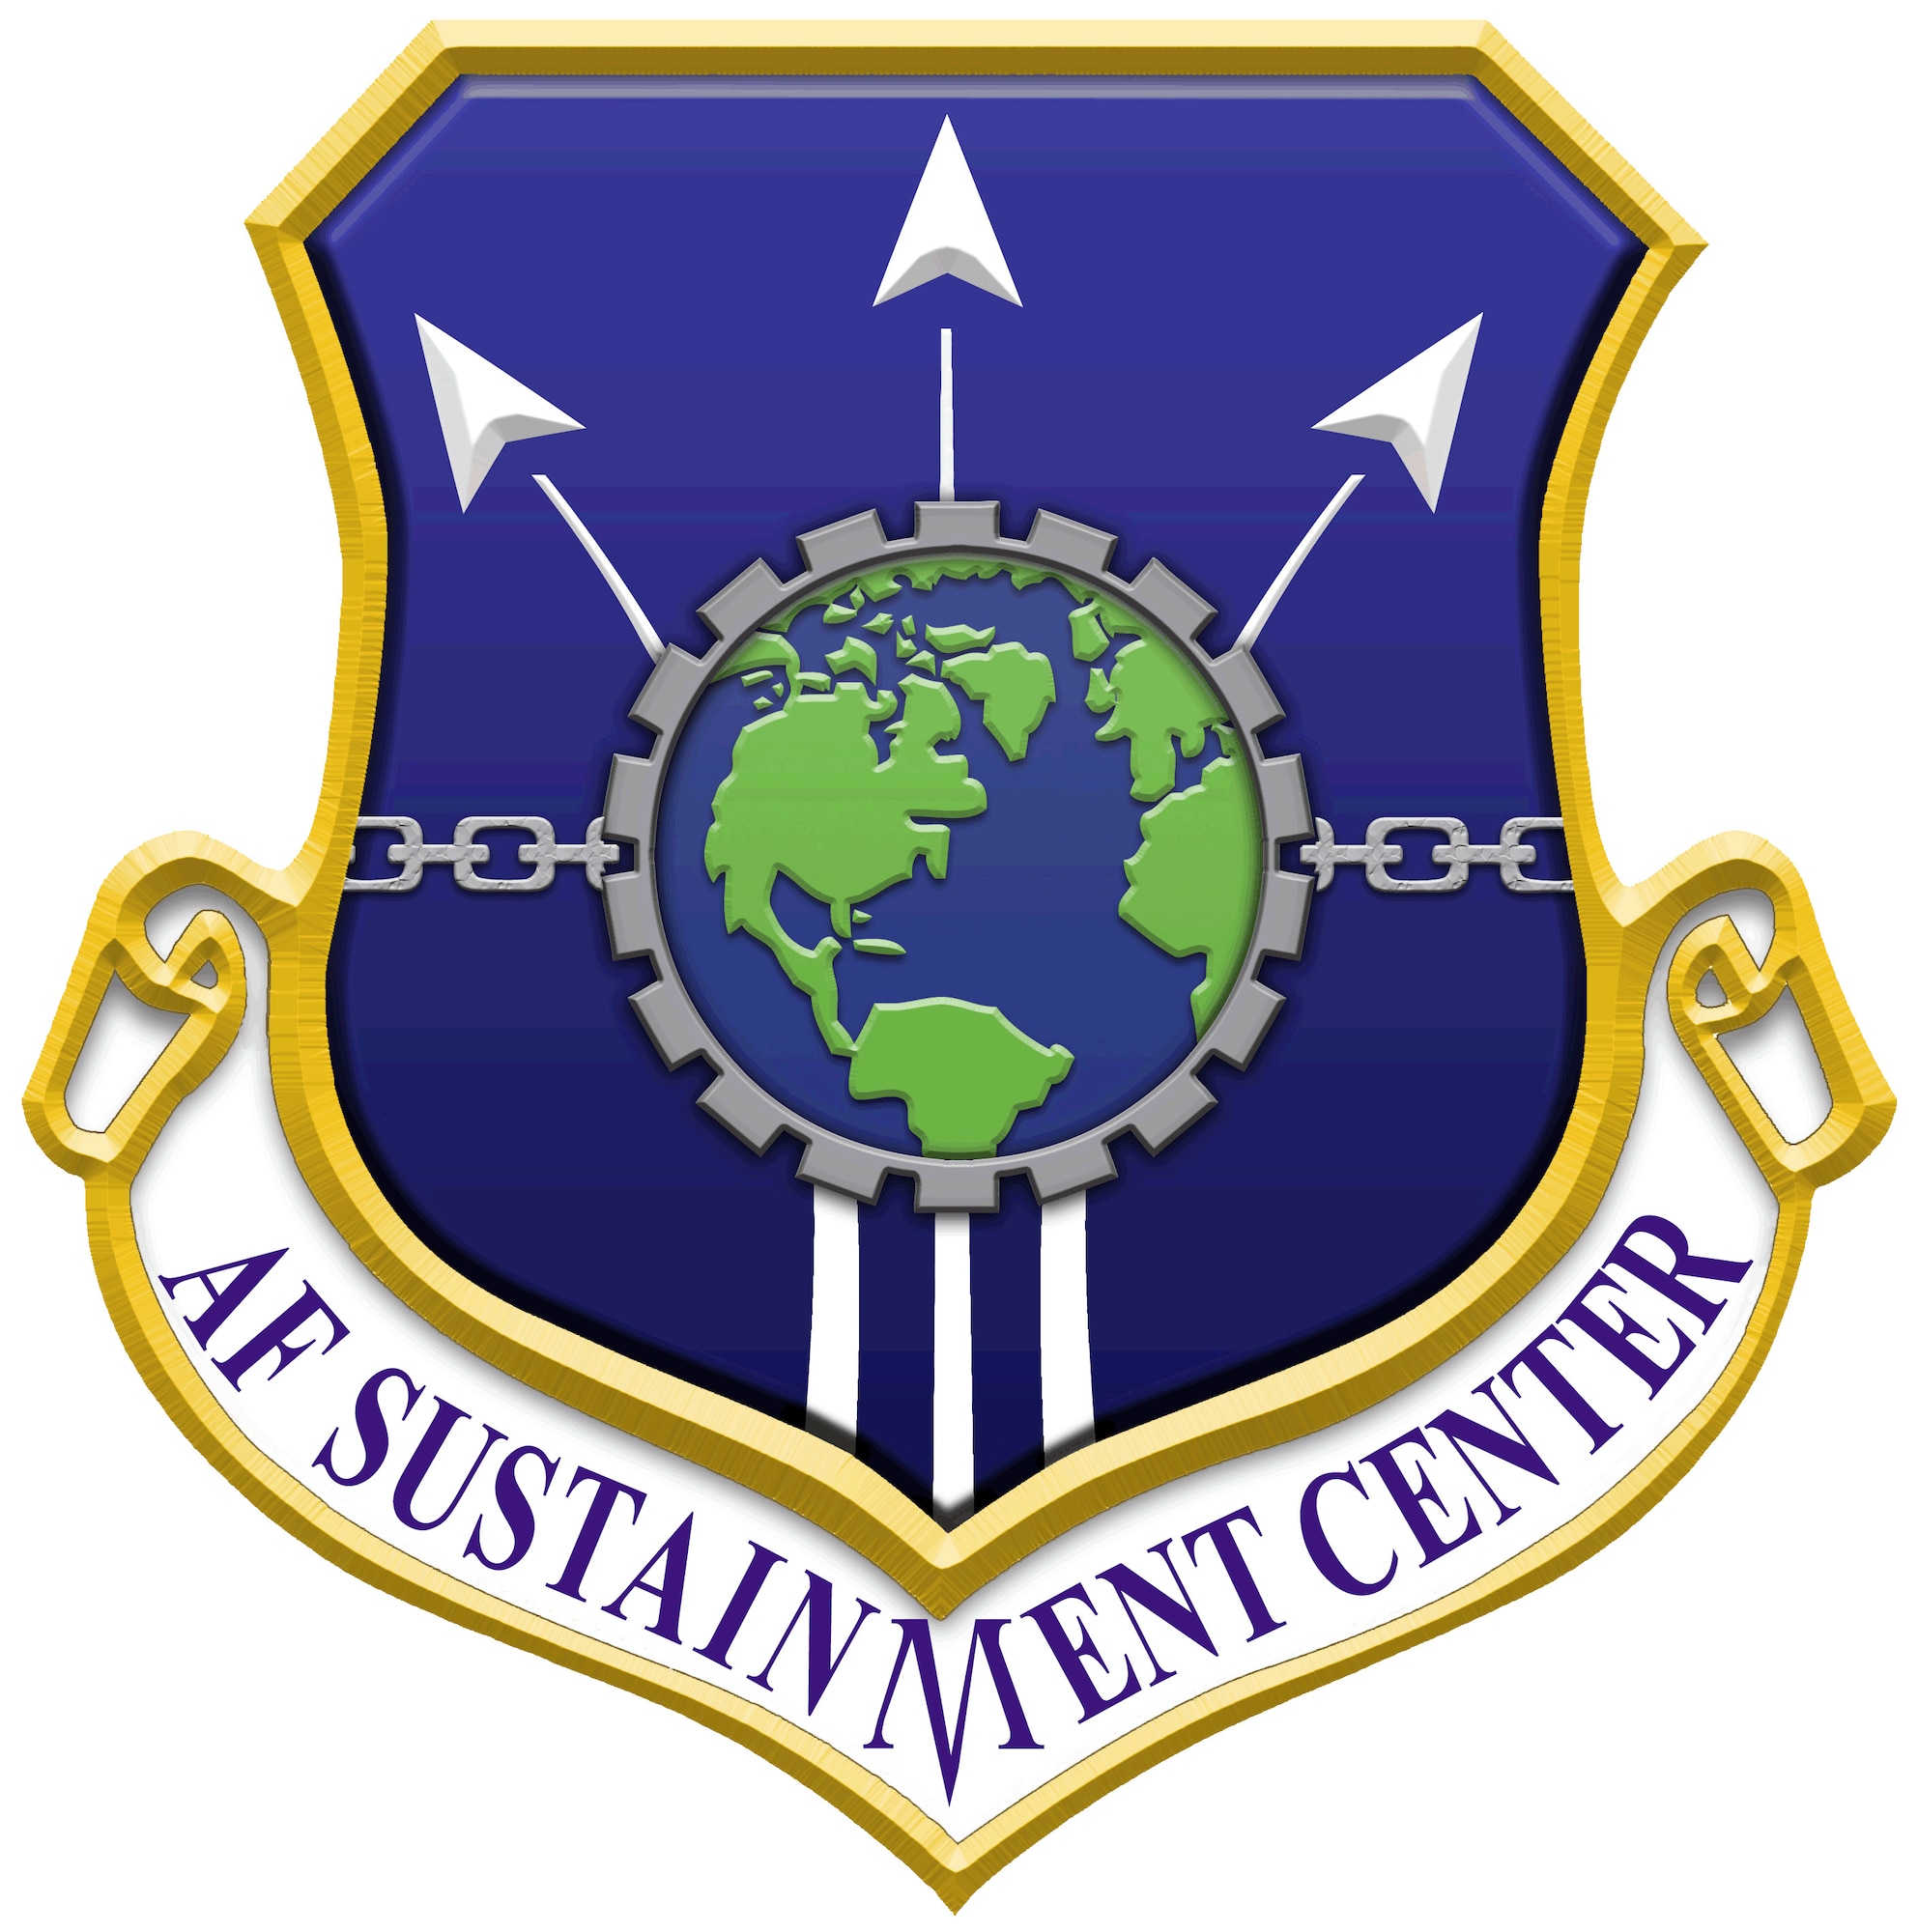 Air Force Sustainment Center shield graphic